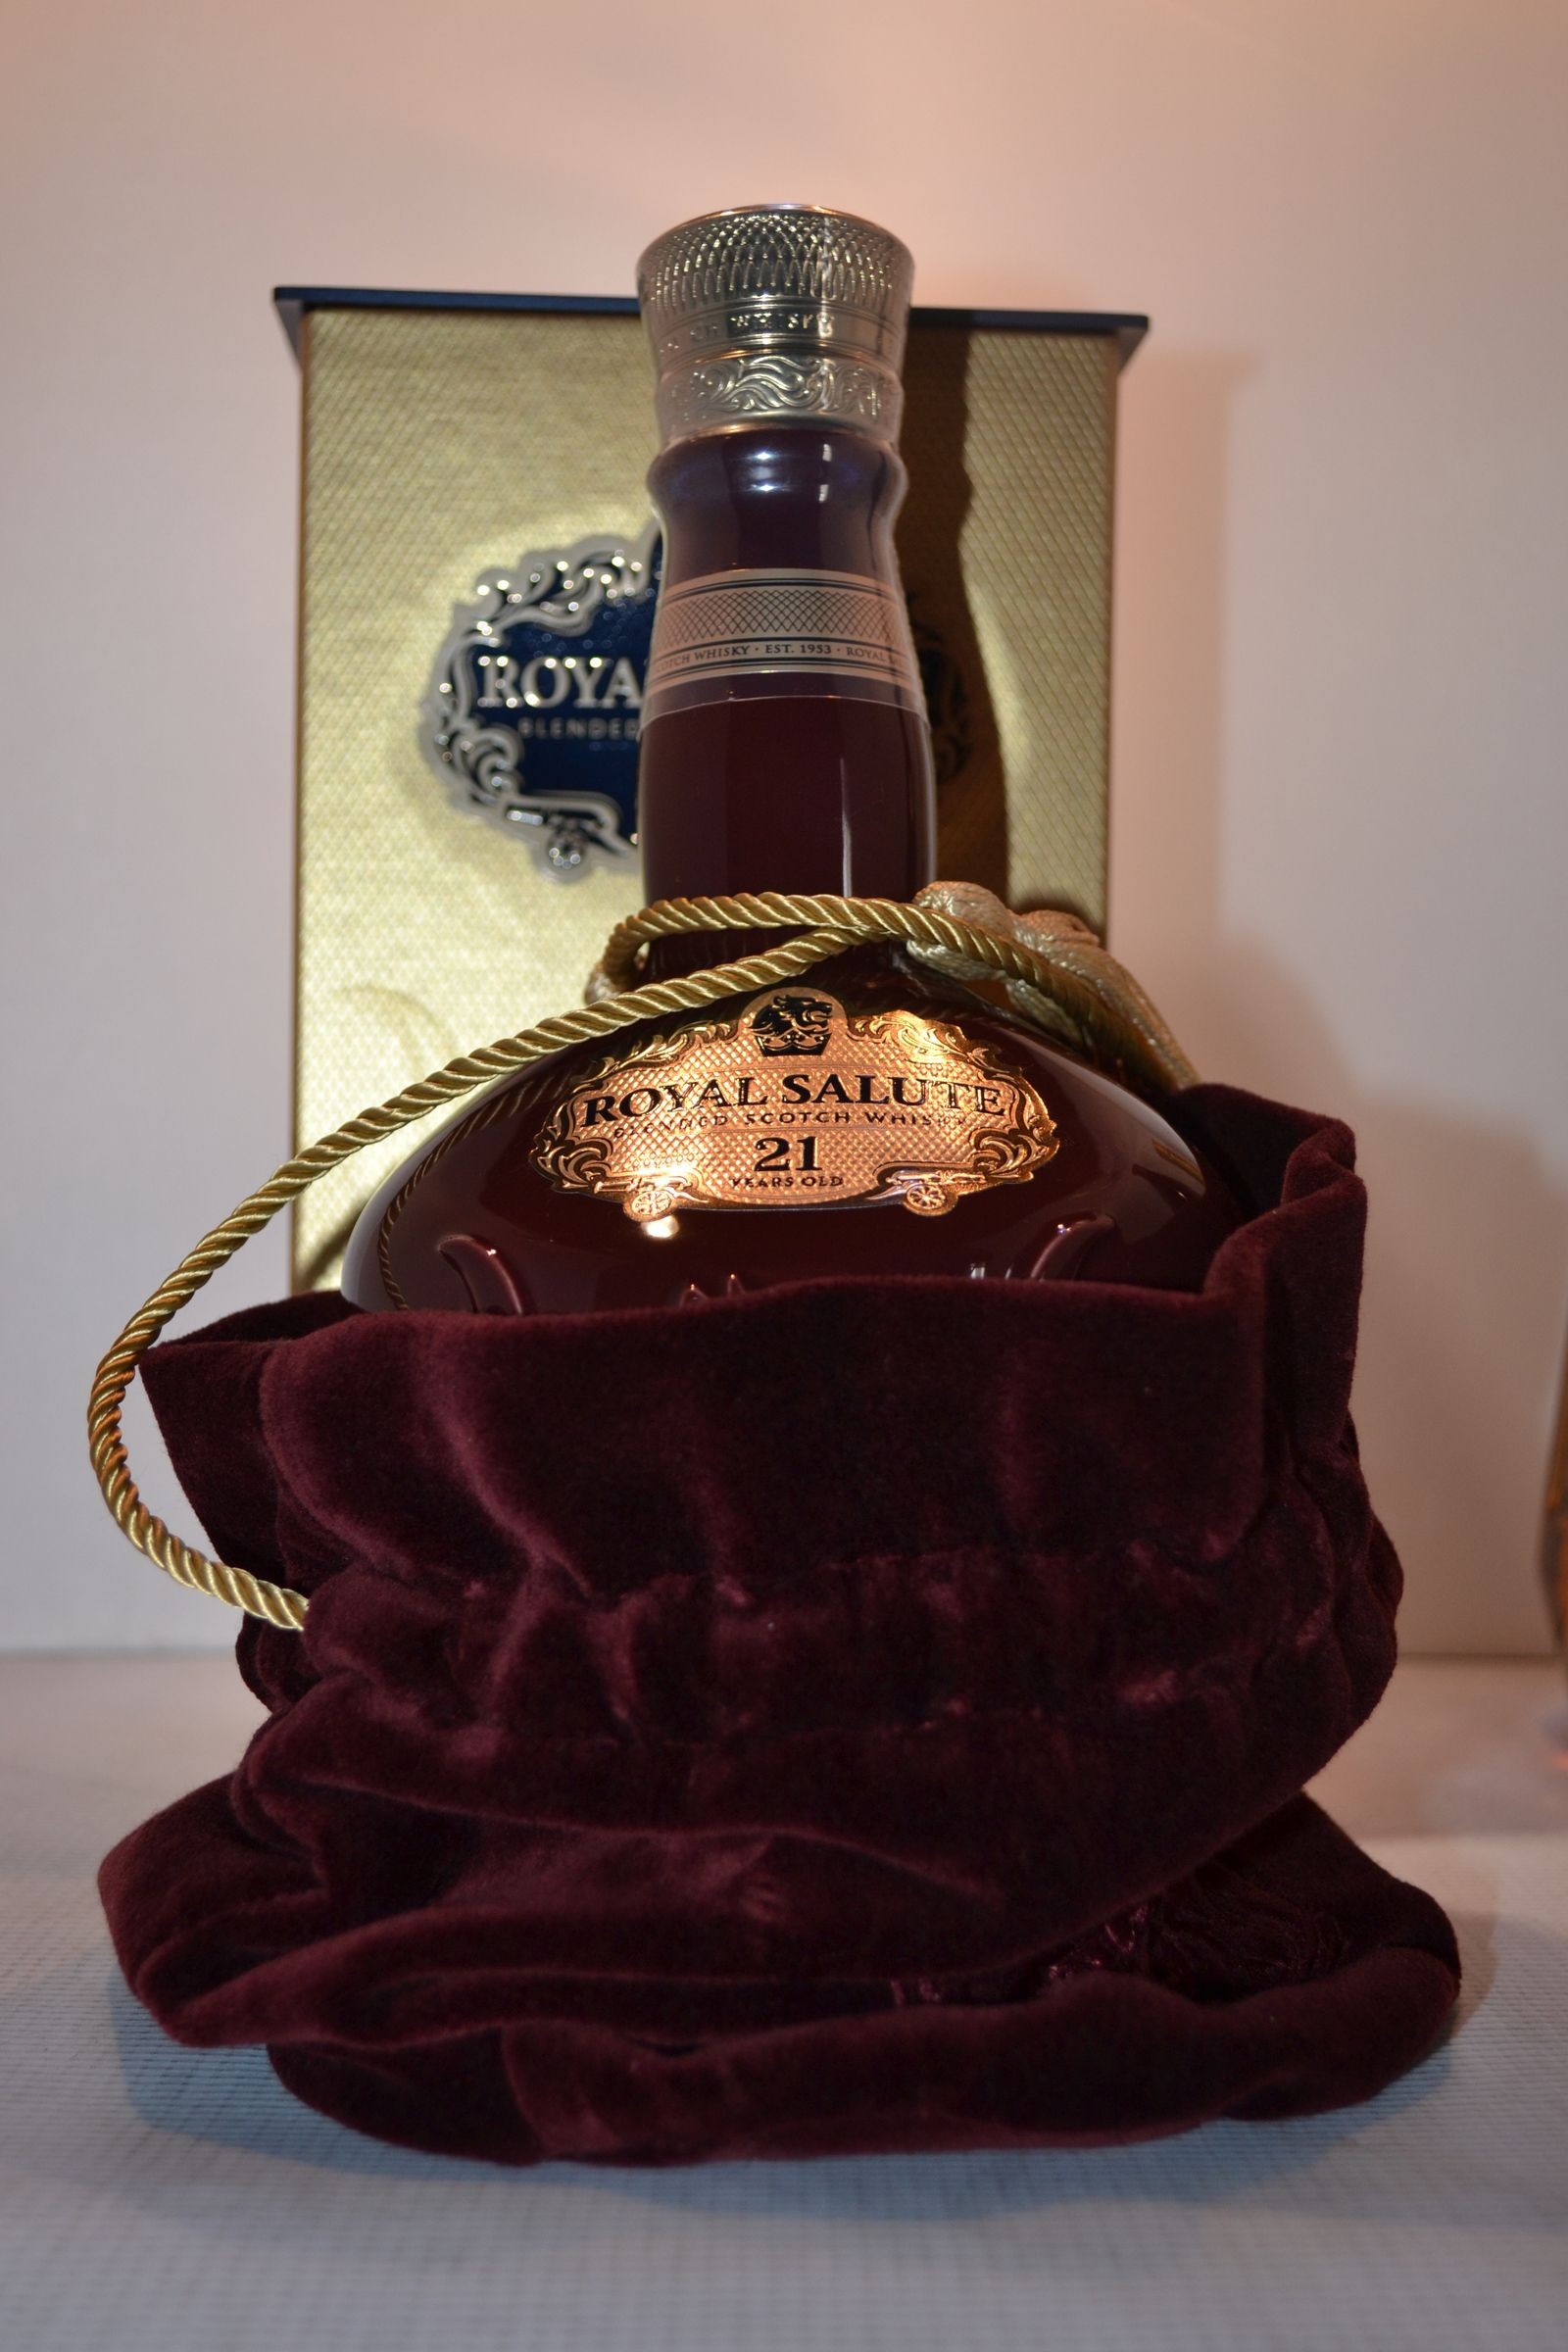 Buy CHIVAS BROTHERS ROYAL SALUTE SCOTCH BLENDED THE RUBY